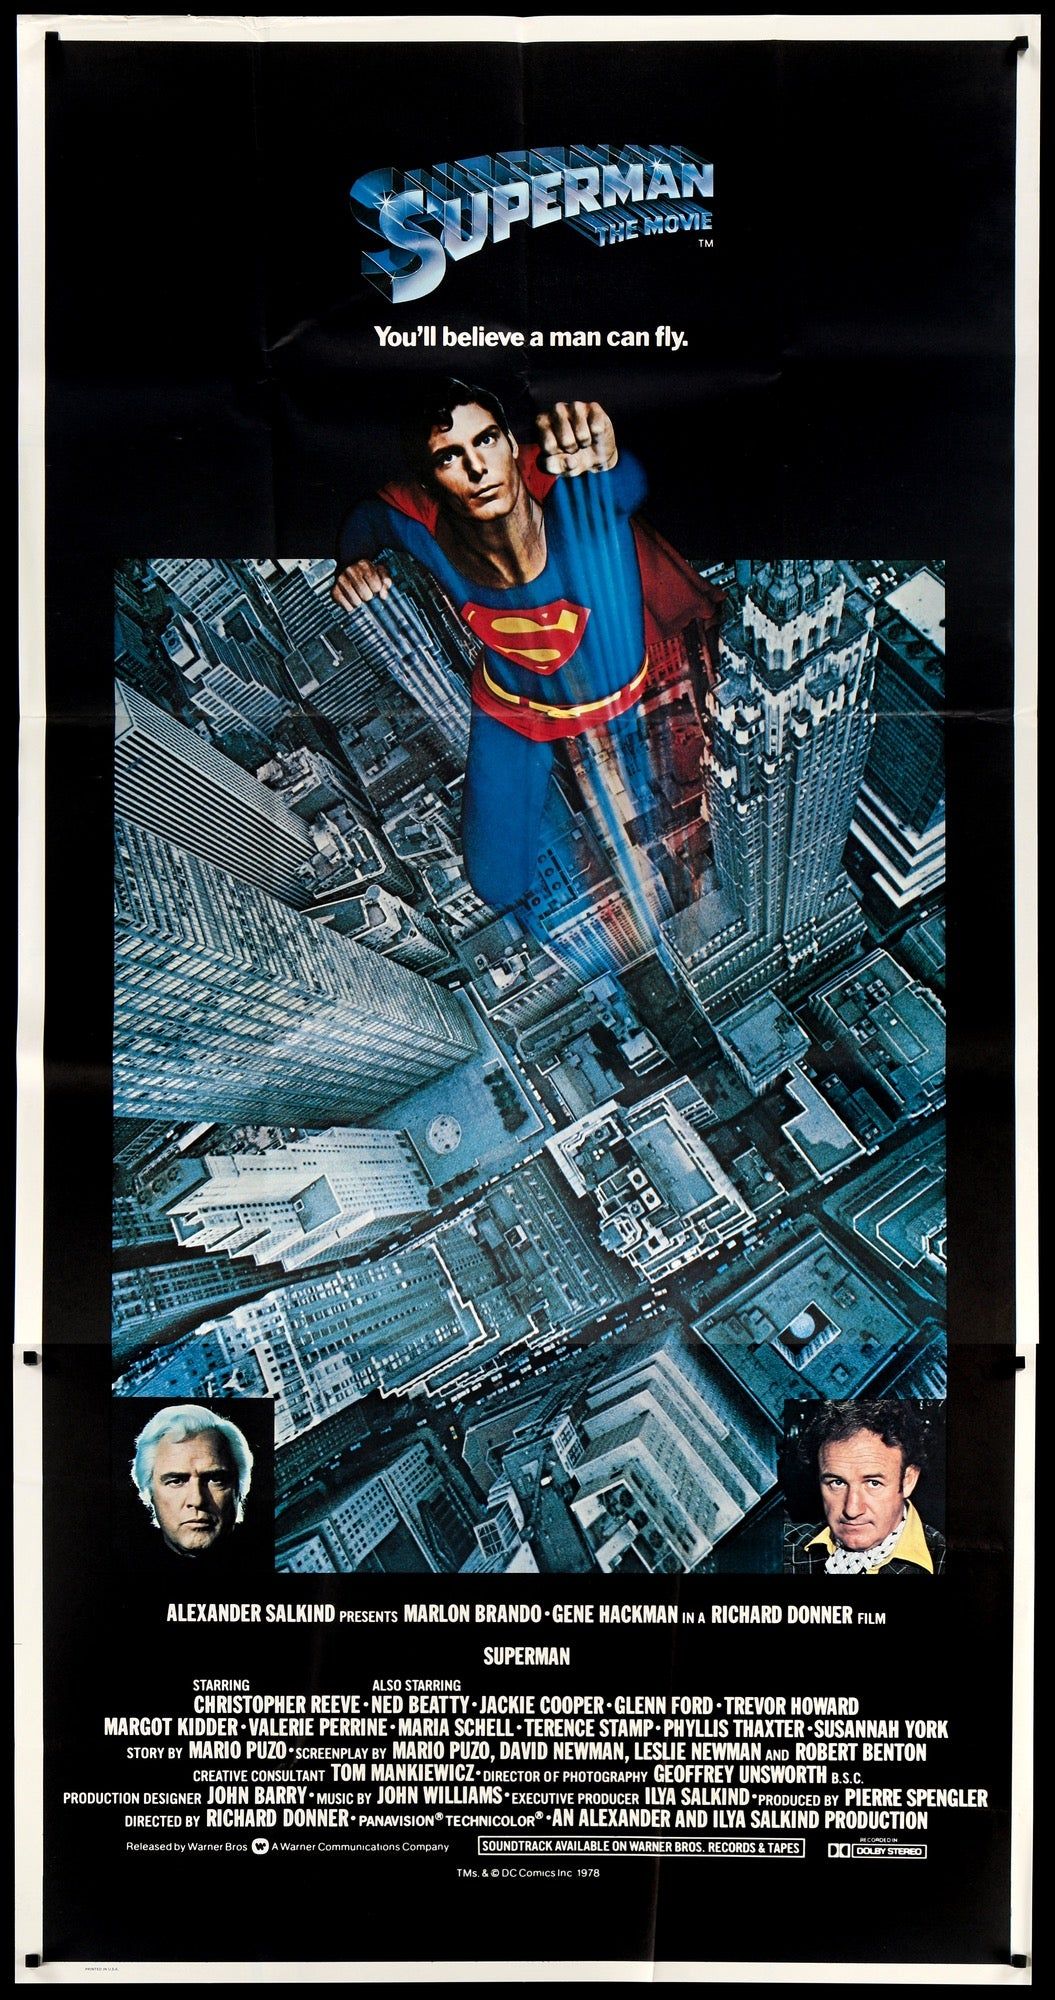 Poster for Superman the Movie with Christopher Reeve as Superman flying up towards the top. Square pictures of Marlon Brando and Gene Hackman in the bottom corners. Text reads Superman the Movie You’ll believe a man can fly.